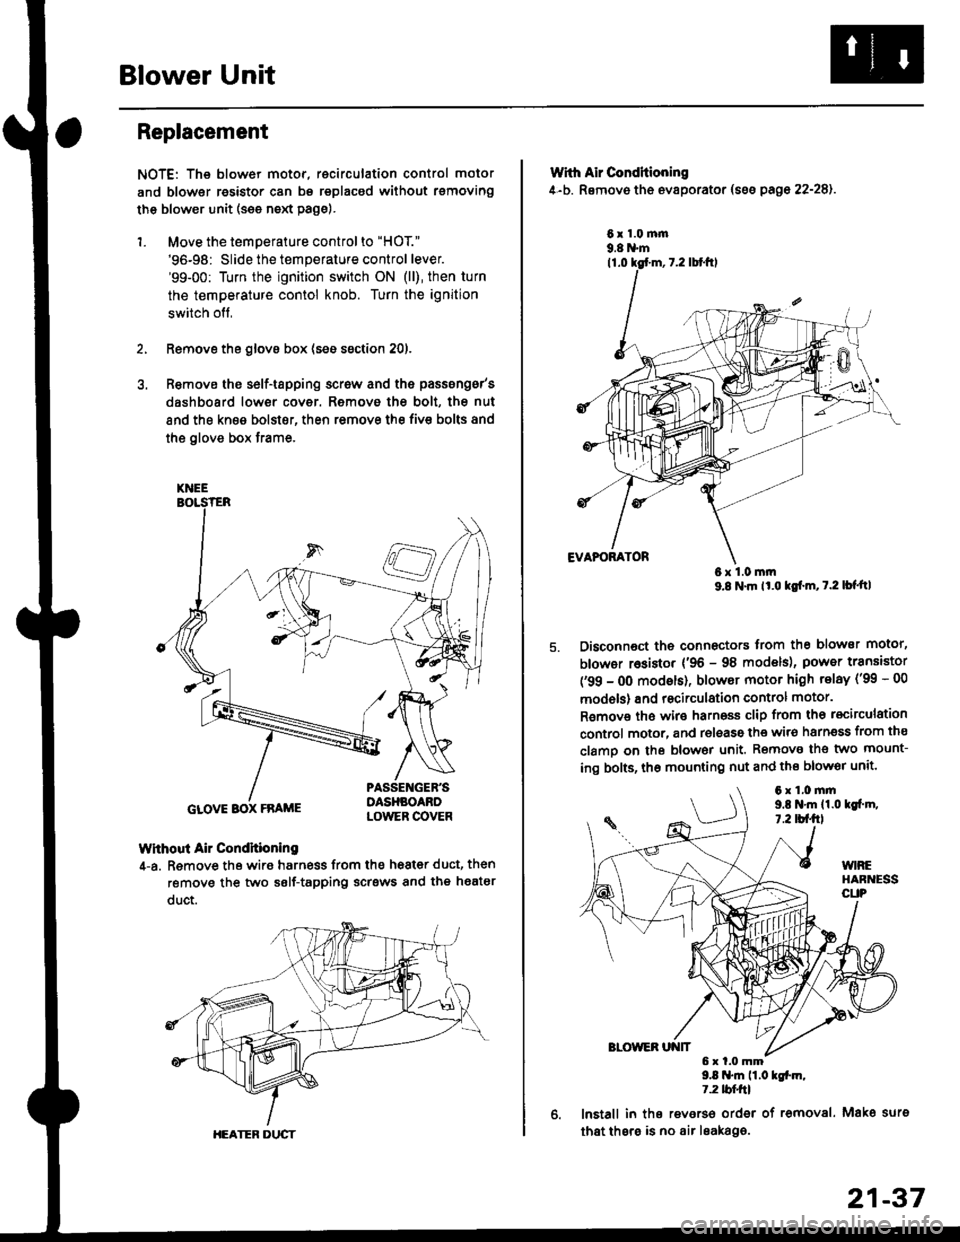 HONDA CIVIC 1996 6.G Workshop Manual Blower Unit
Replacement
NOTE: The blower motor, recirculation control motor
and blower resistor can bs replacsd without rsmoving
th€ blower unit (see neld Page).
1. Move the temperature control to "